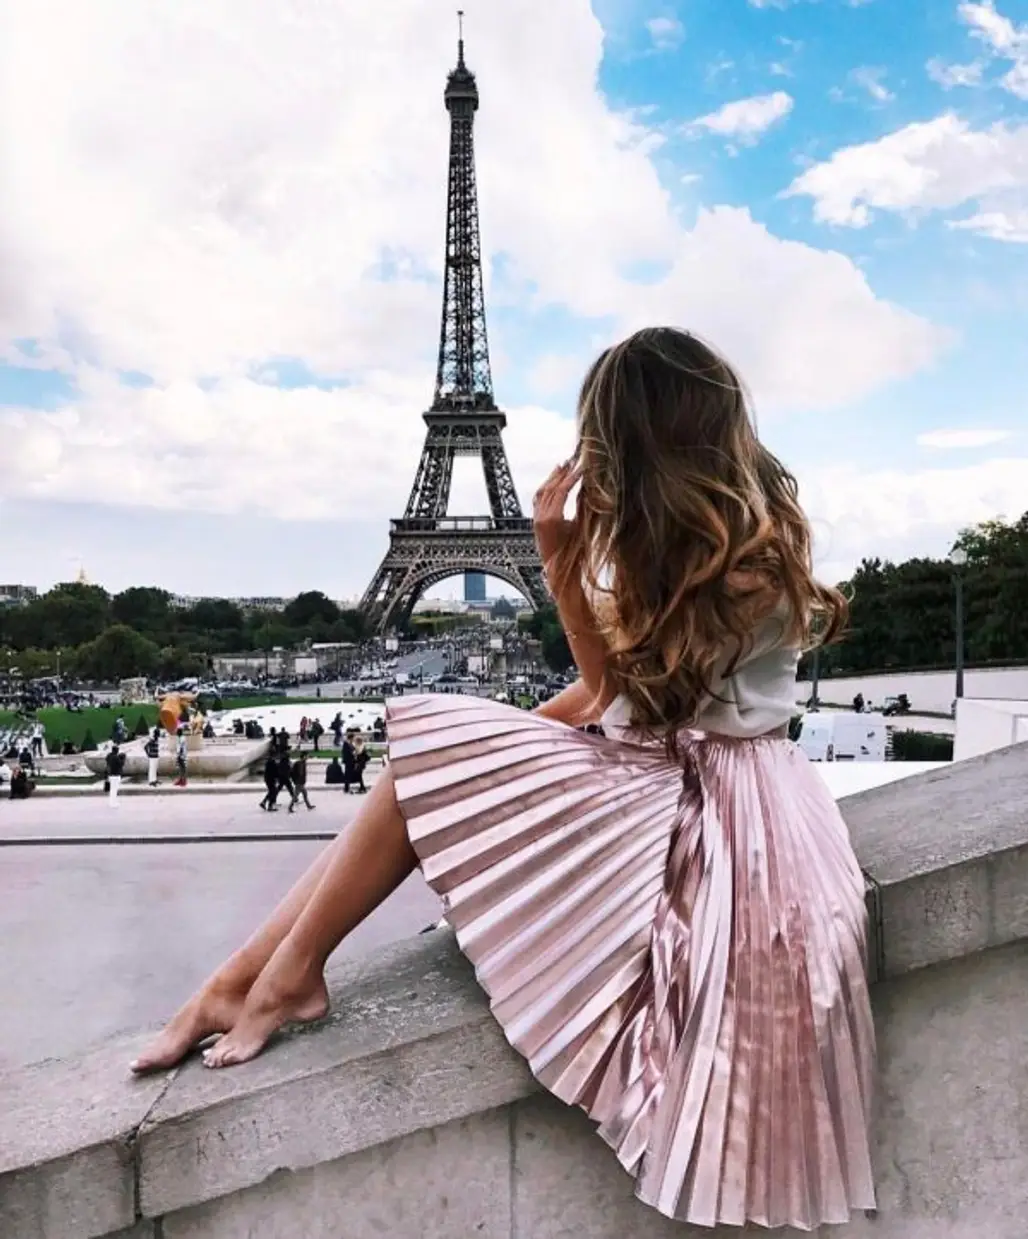 Eiffel Tower, photograph, human positions, image, sitting,